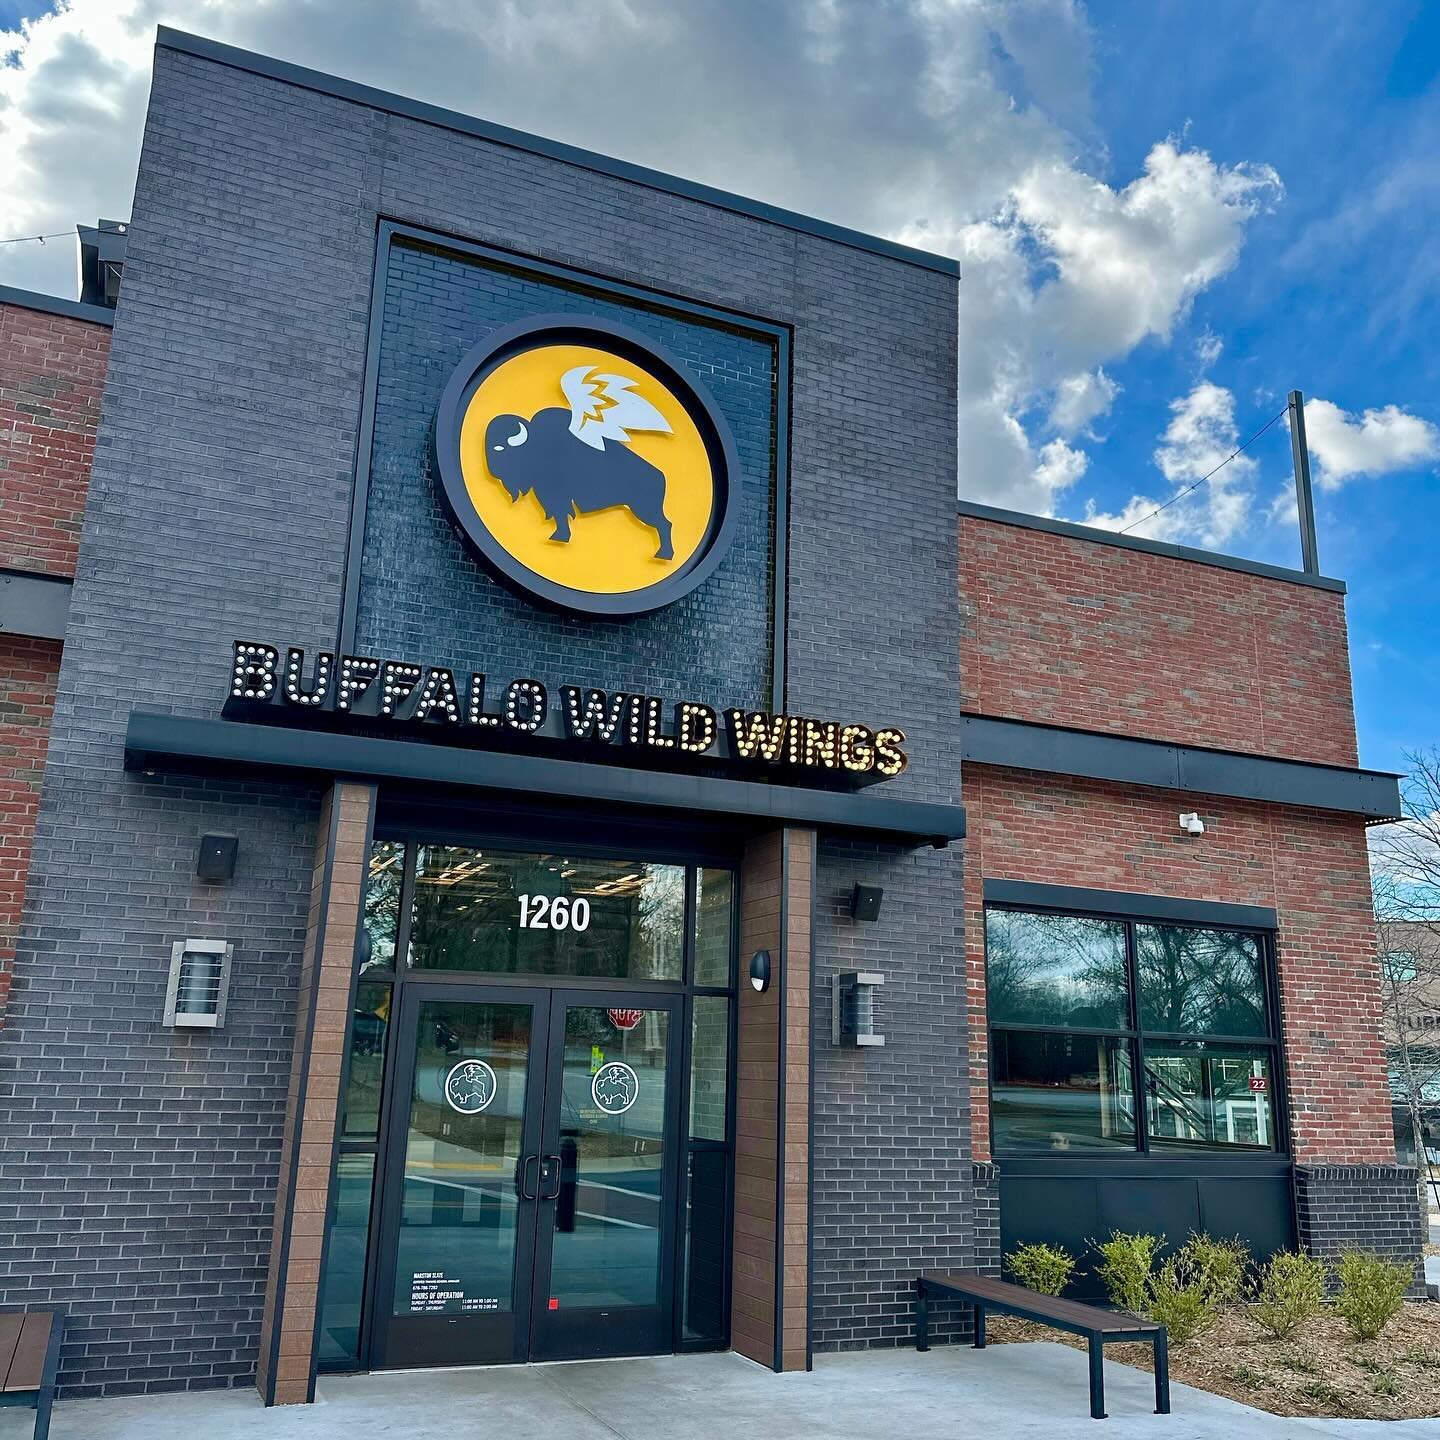 Shaking up the beverage scene in Atlanta! 🍹

PHCP&rsquo;s award-winning Beverage Innovation Team joins forces with Buffalo Wild Wings/Inspire Brands to stir up new cocktail trends. Director Kevin shook, strained and sizzled the group while Executive